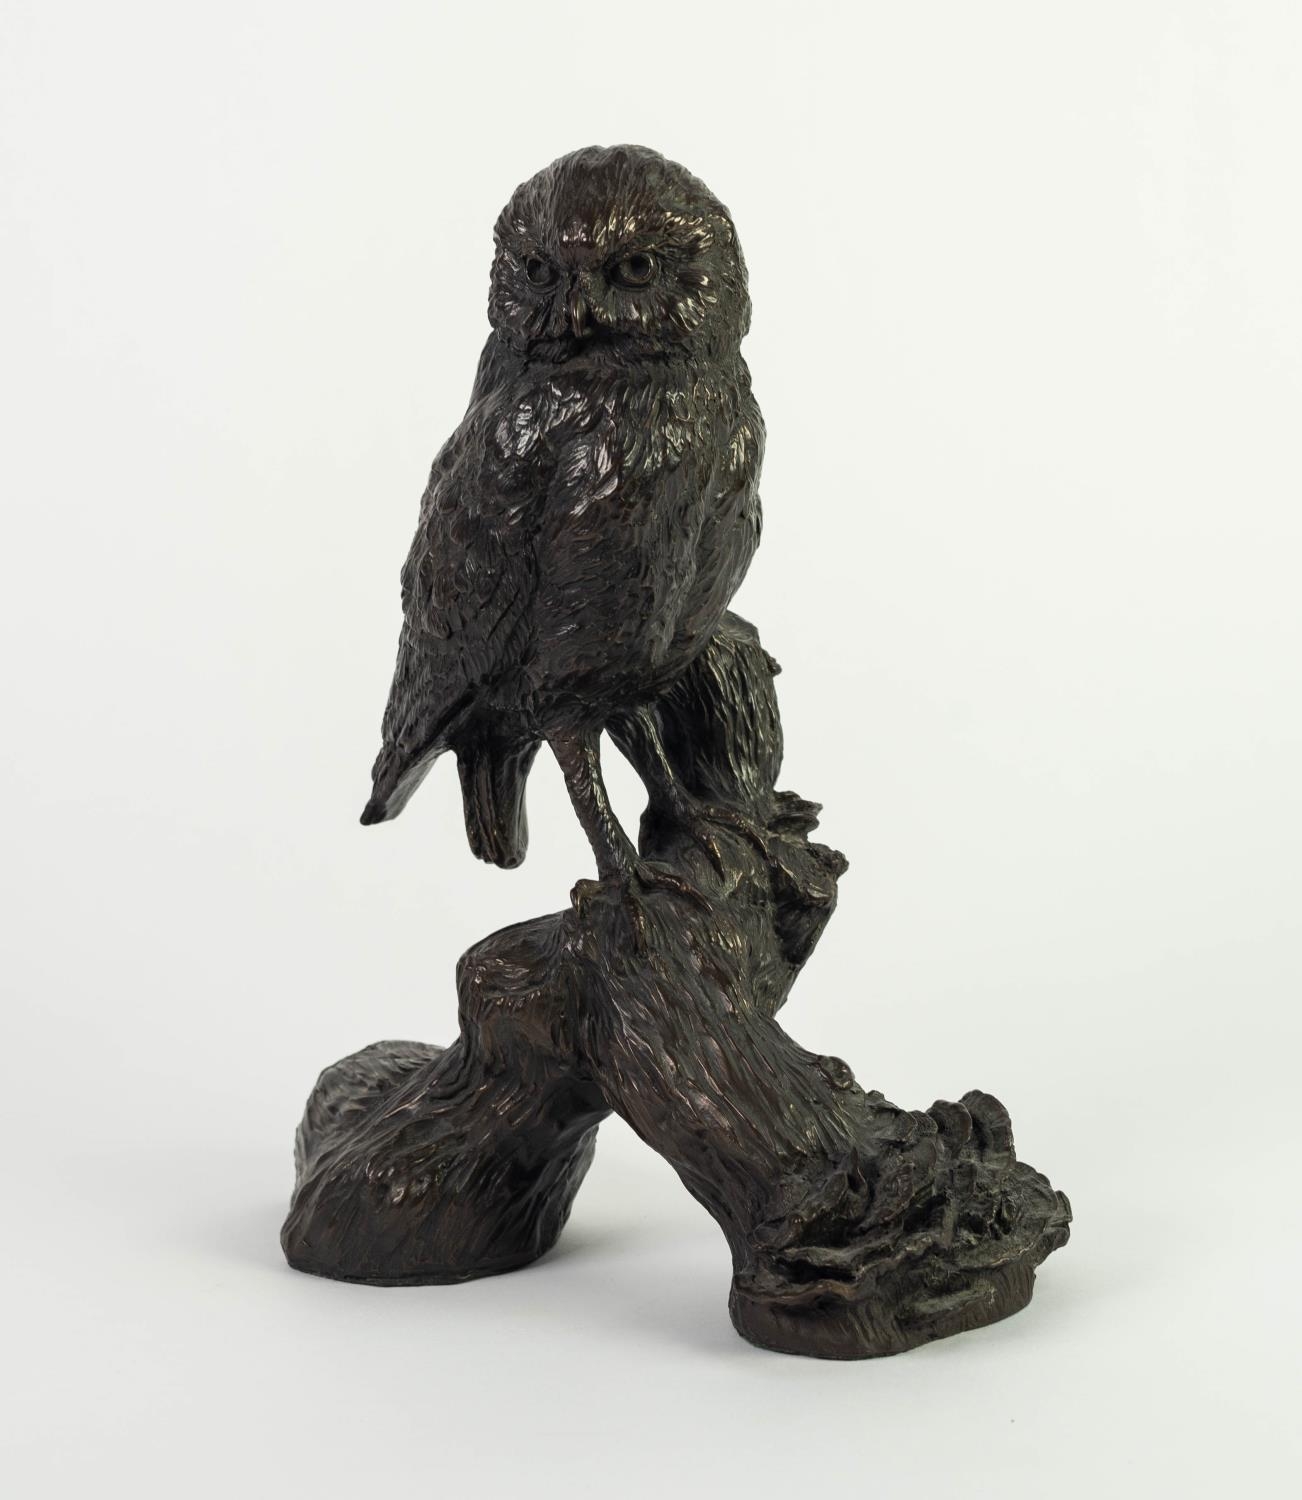 JEANNE RYNHART (1946-2020) BRONZED RESIN SCULPTURE Modelled as an owl perched on a tree branch